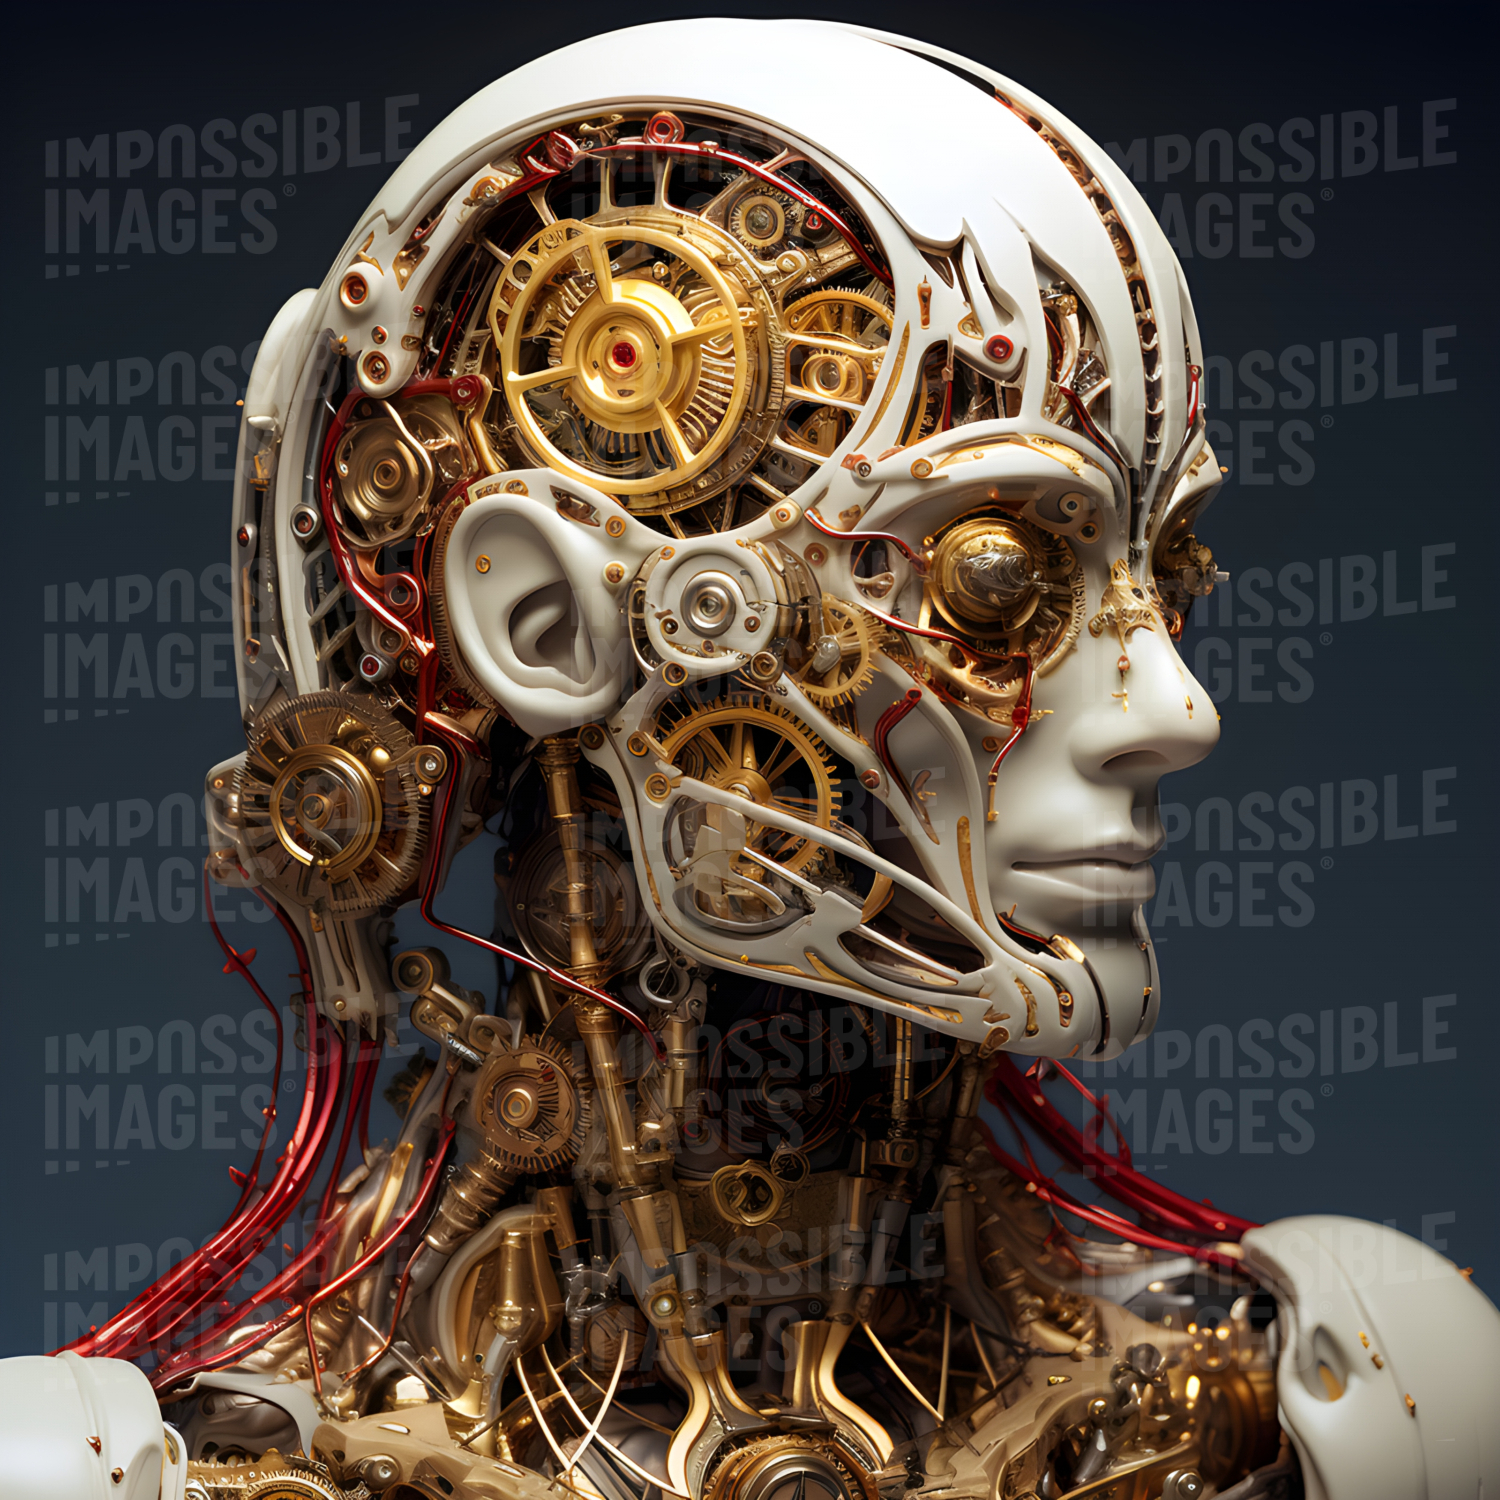 Ornate model of a stylised human head with complex clockwork inside -  An intricately crafted model of a stylised human head, with a complex clockwork mechanism inside, intricately designed and decorated.